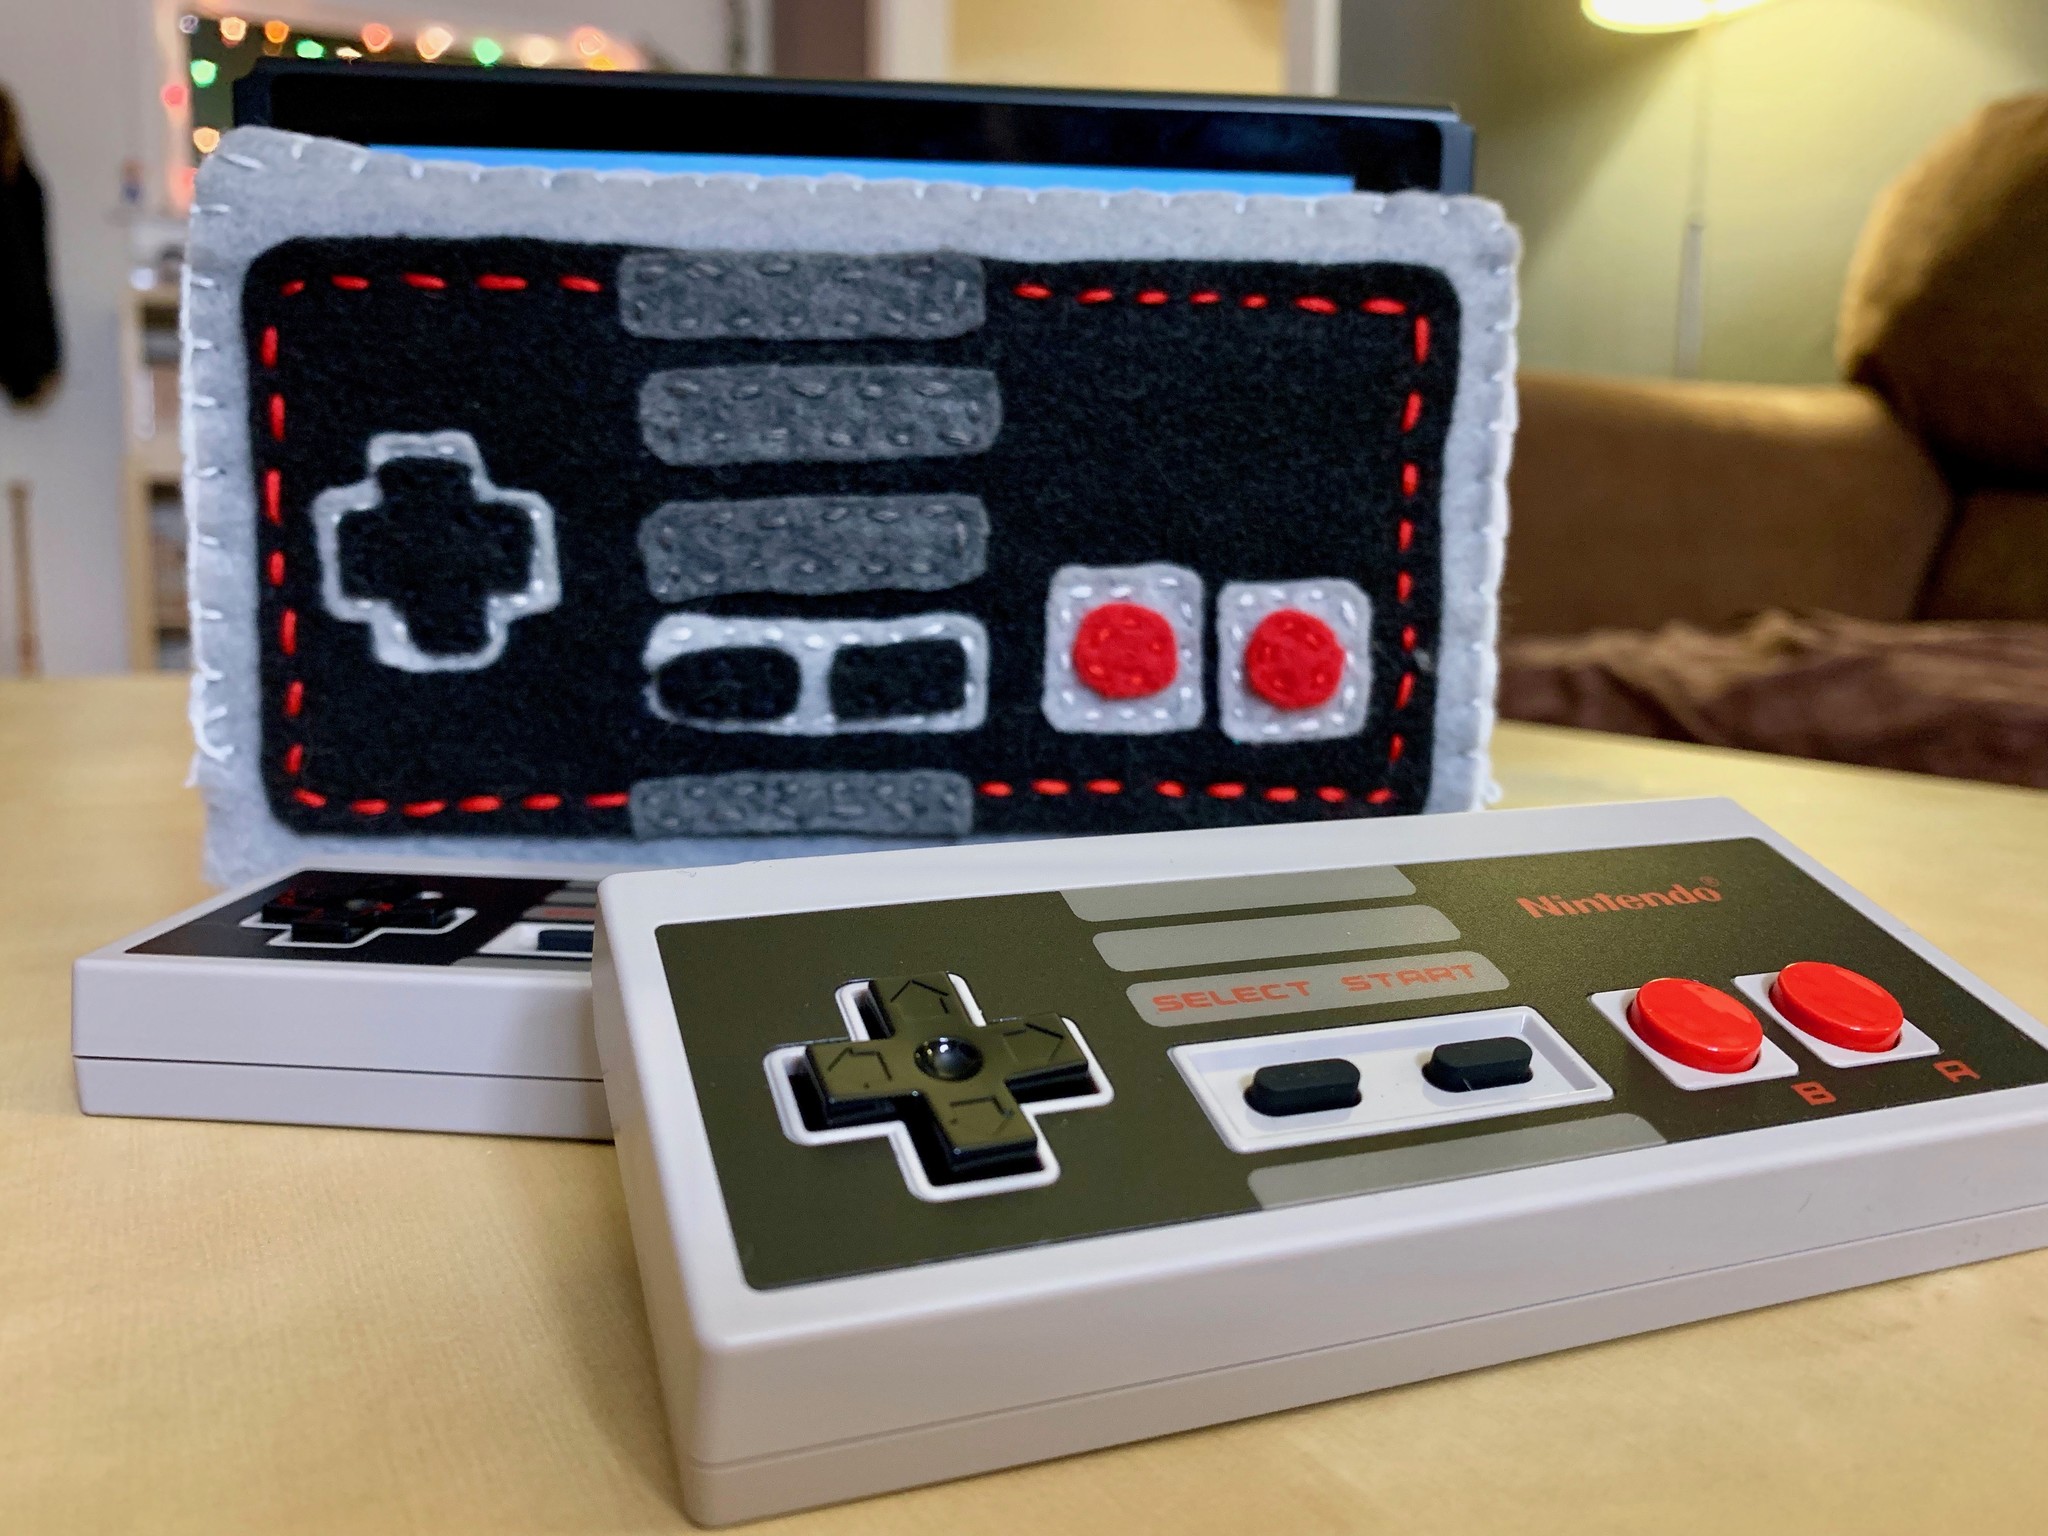 NES controllers with Nintendo Switch